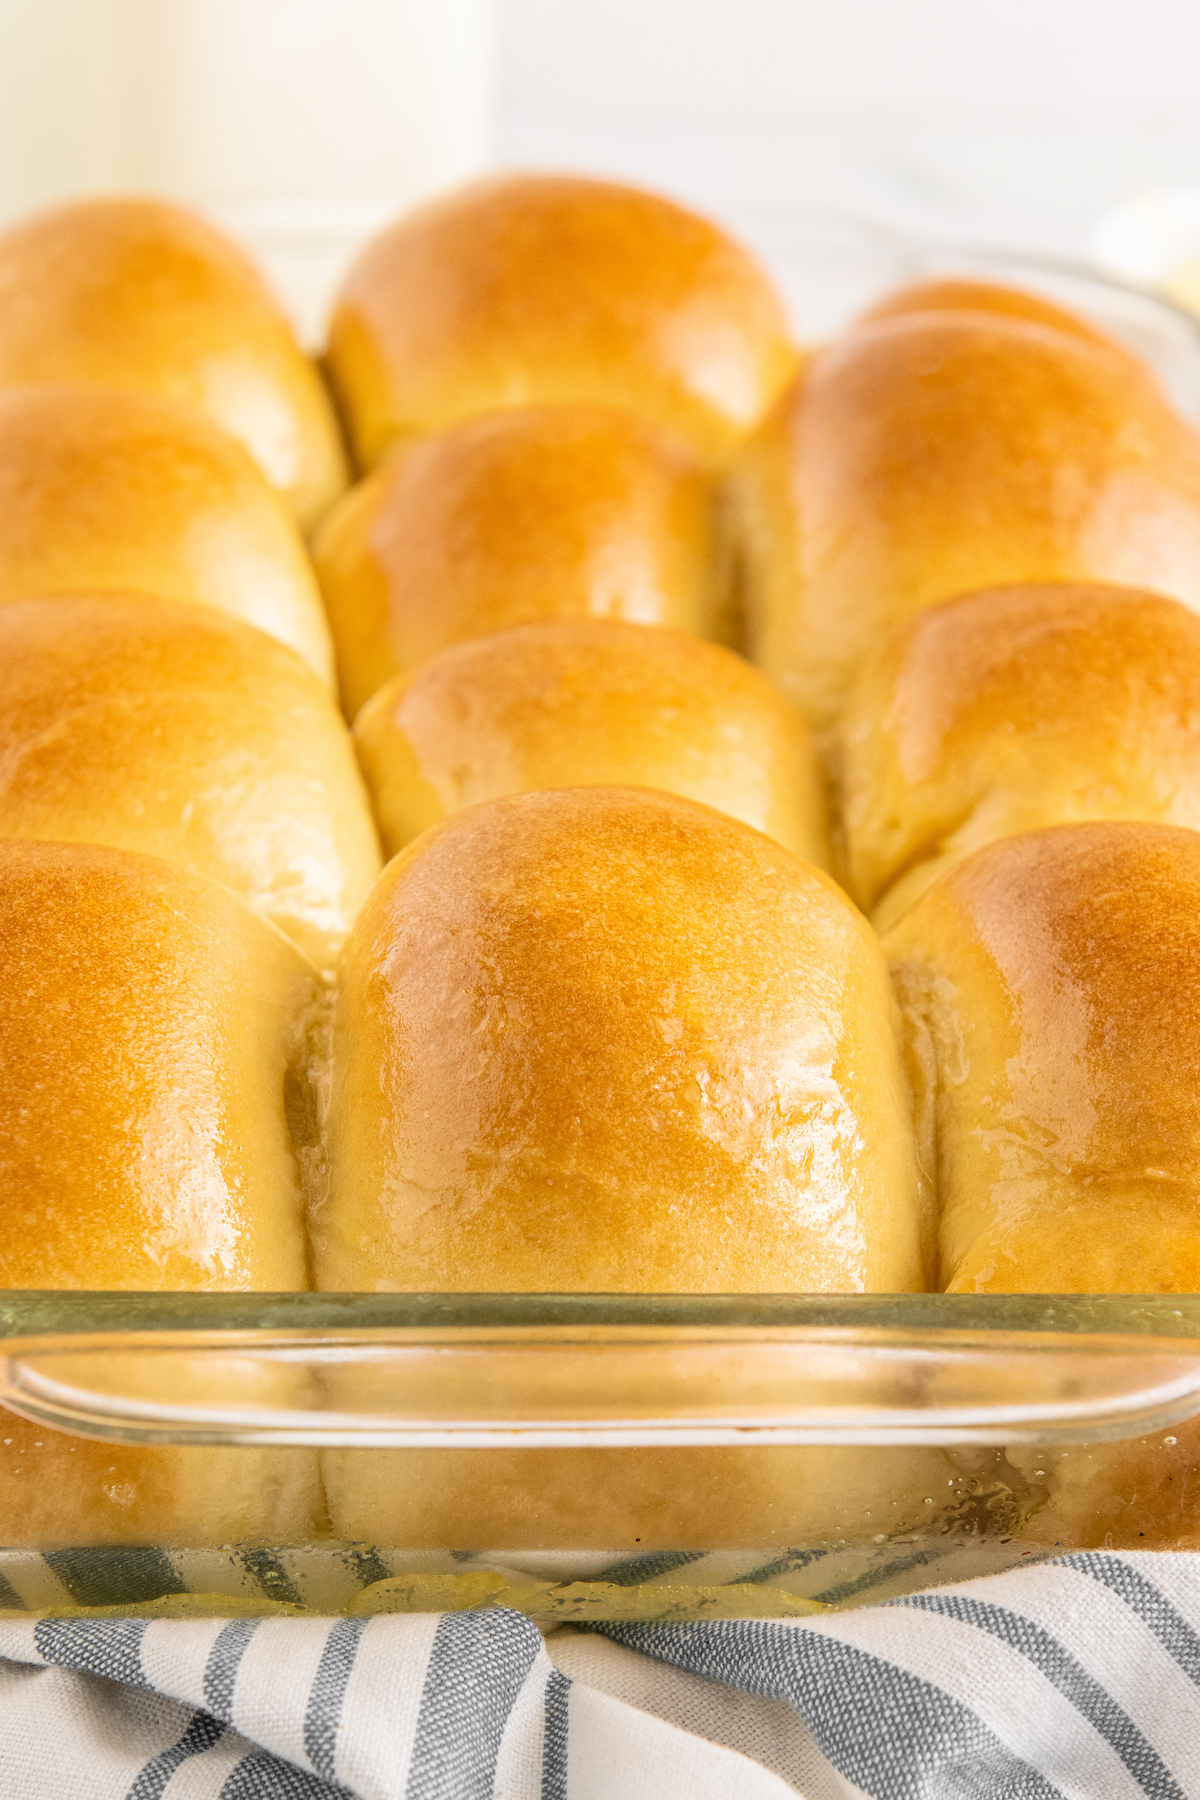 A pan of yeast rolls brushed with butter.